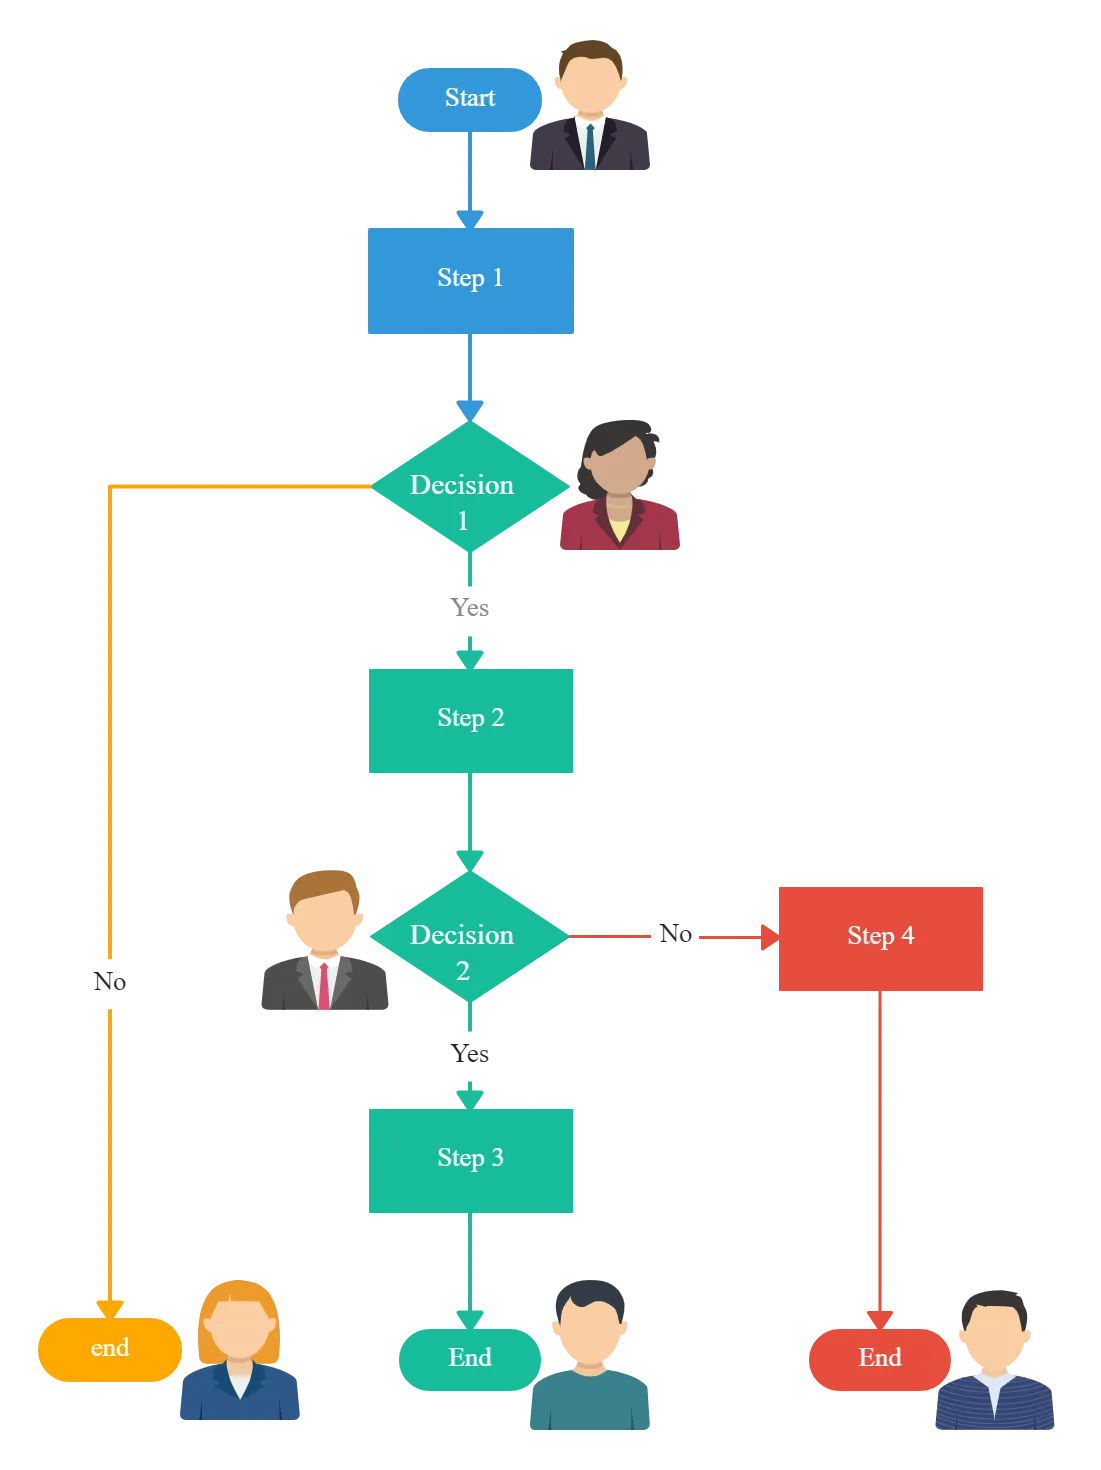 Example of a Flowchart